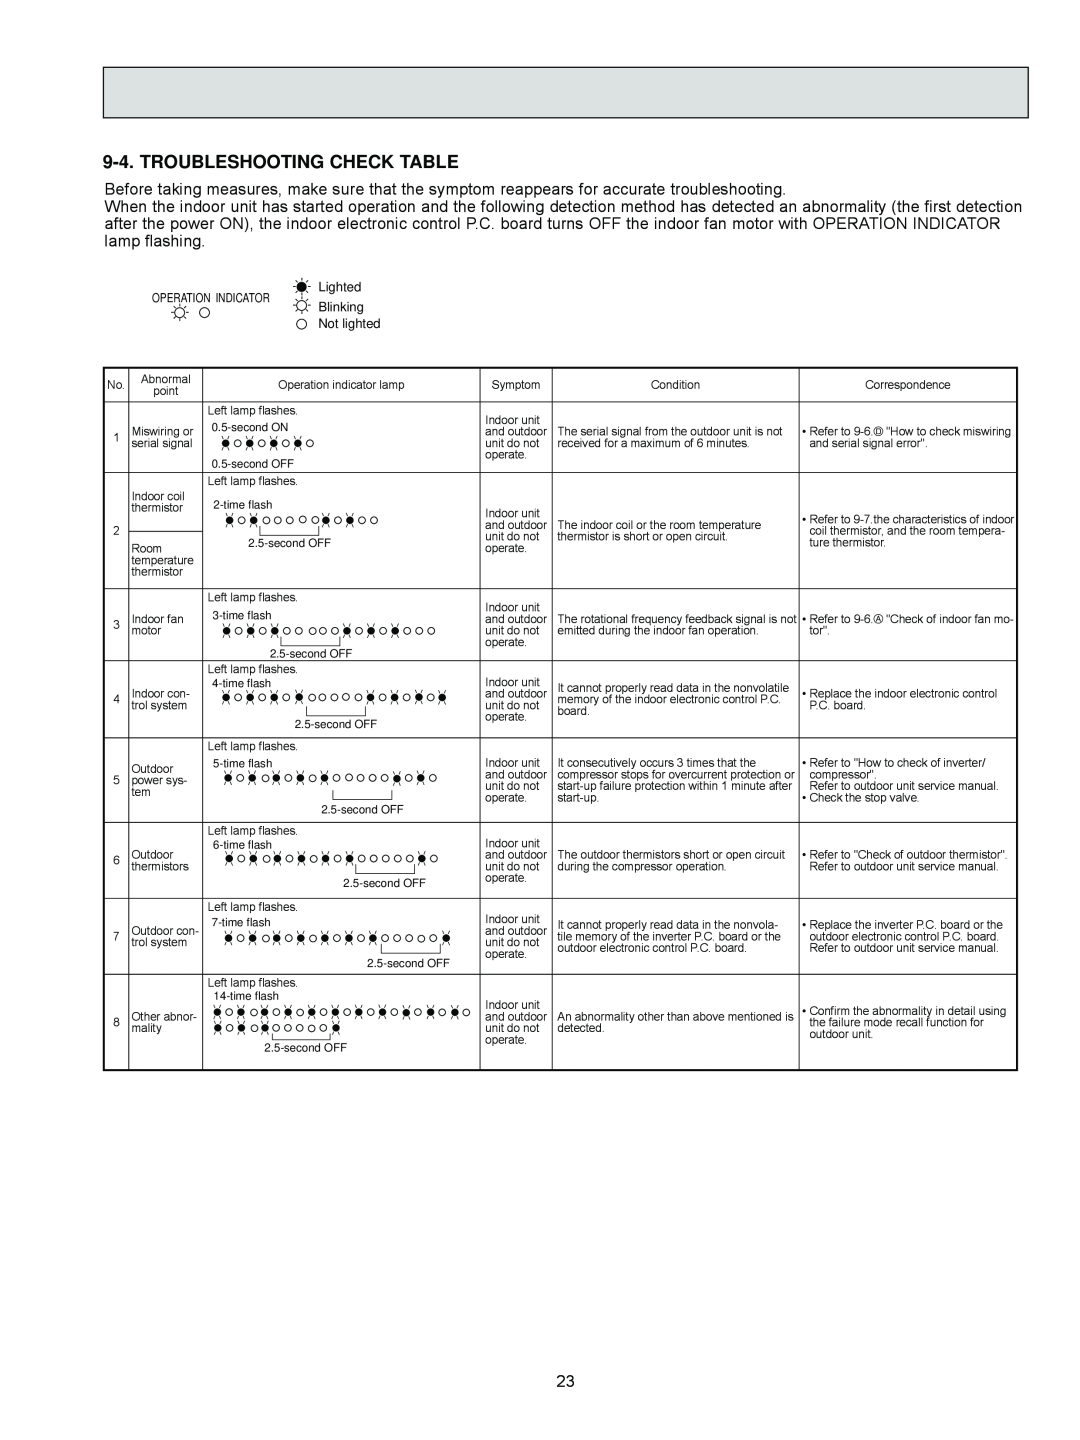 Vermont Casting MSY-D30NA, MSZ-D36NA, MSZ-D30NA, MSY-D36NA service manual Troubleshooting Check Table 